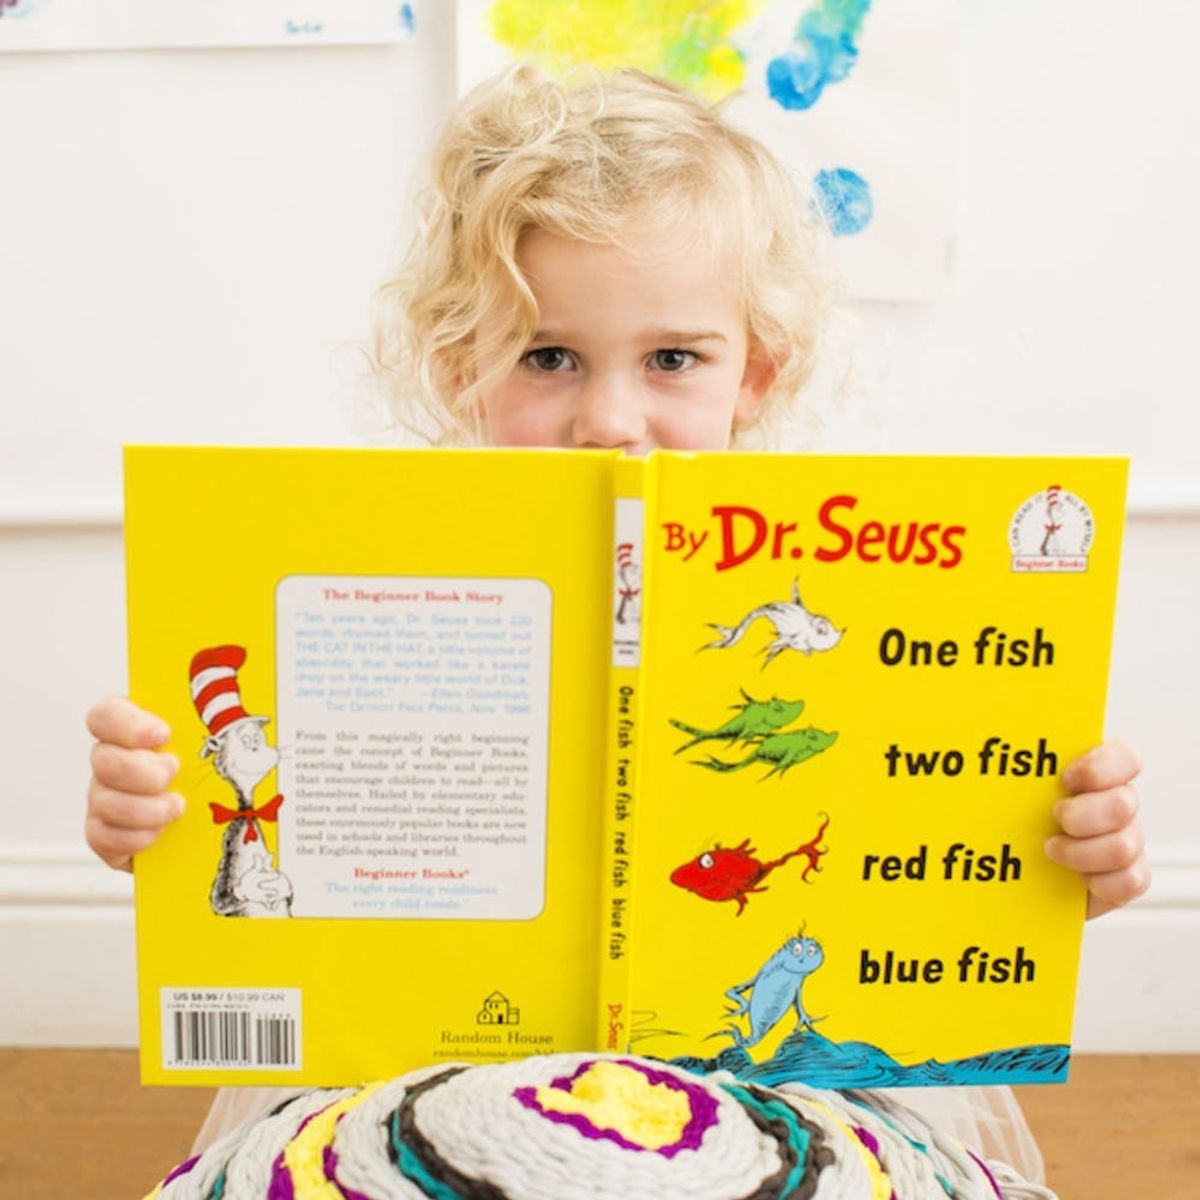 7 Expert Tips to Get Your Kid Reading More